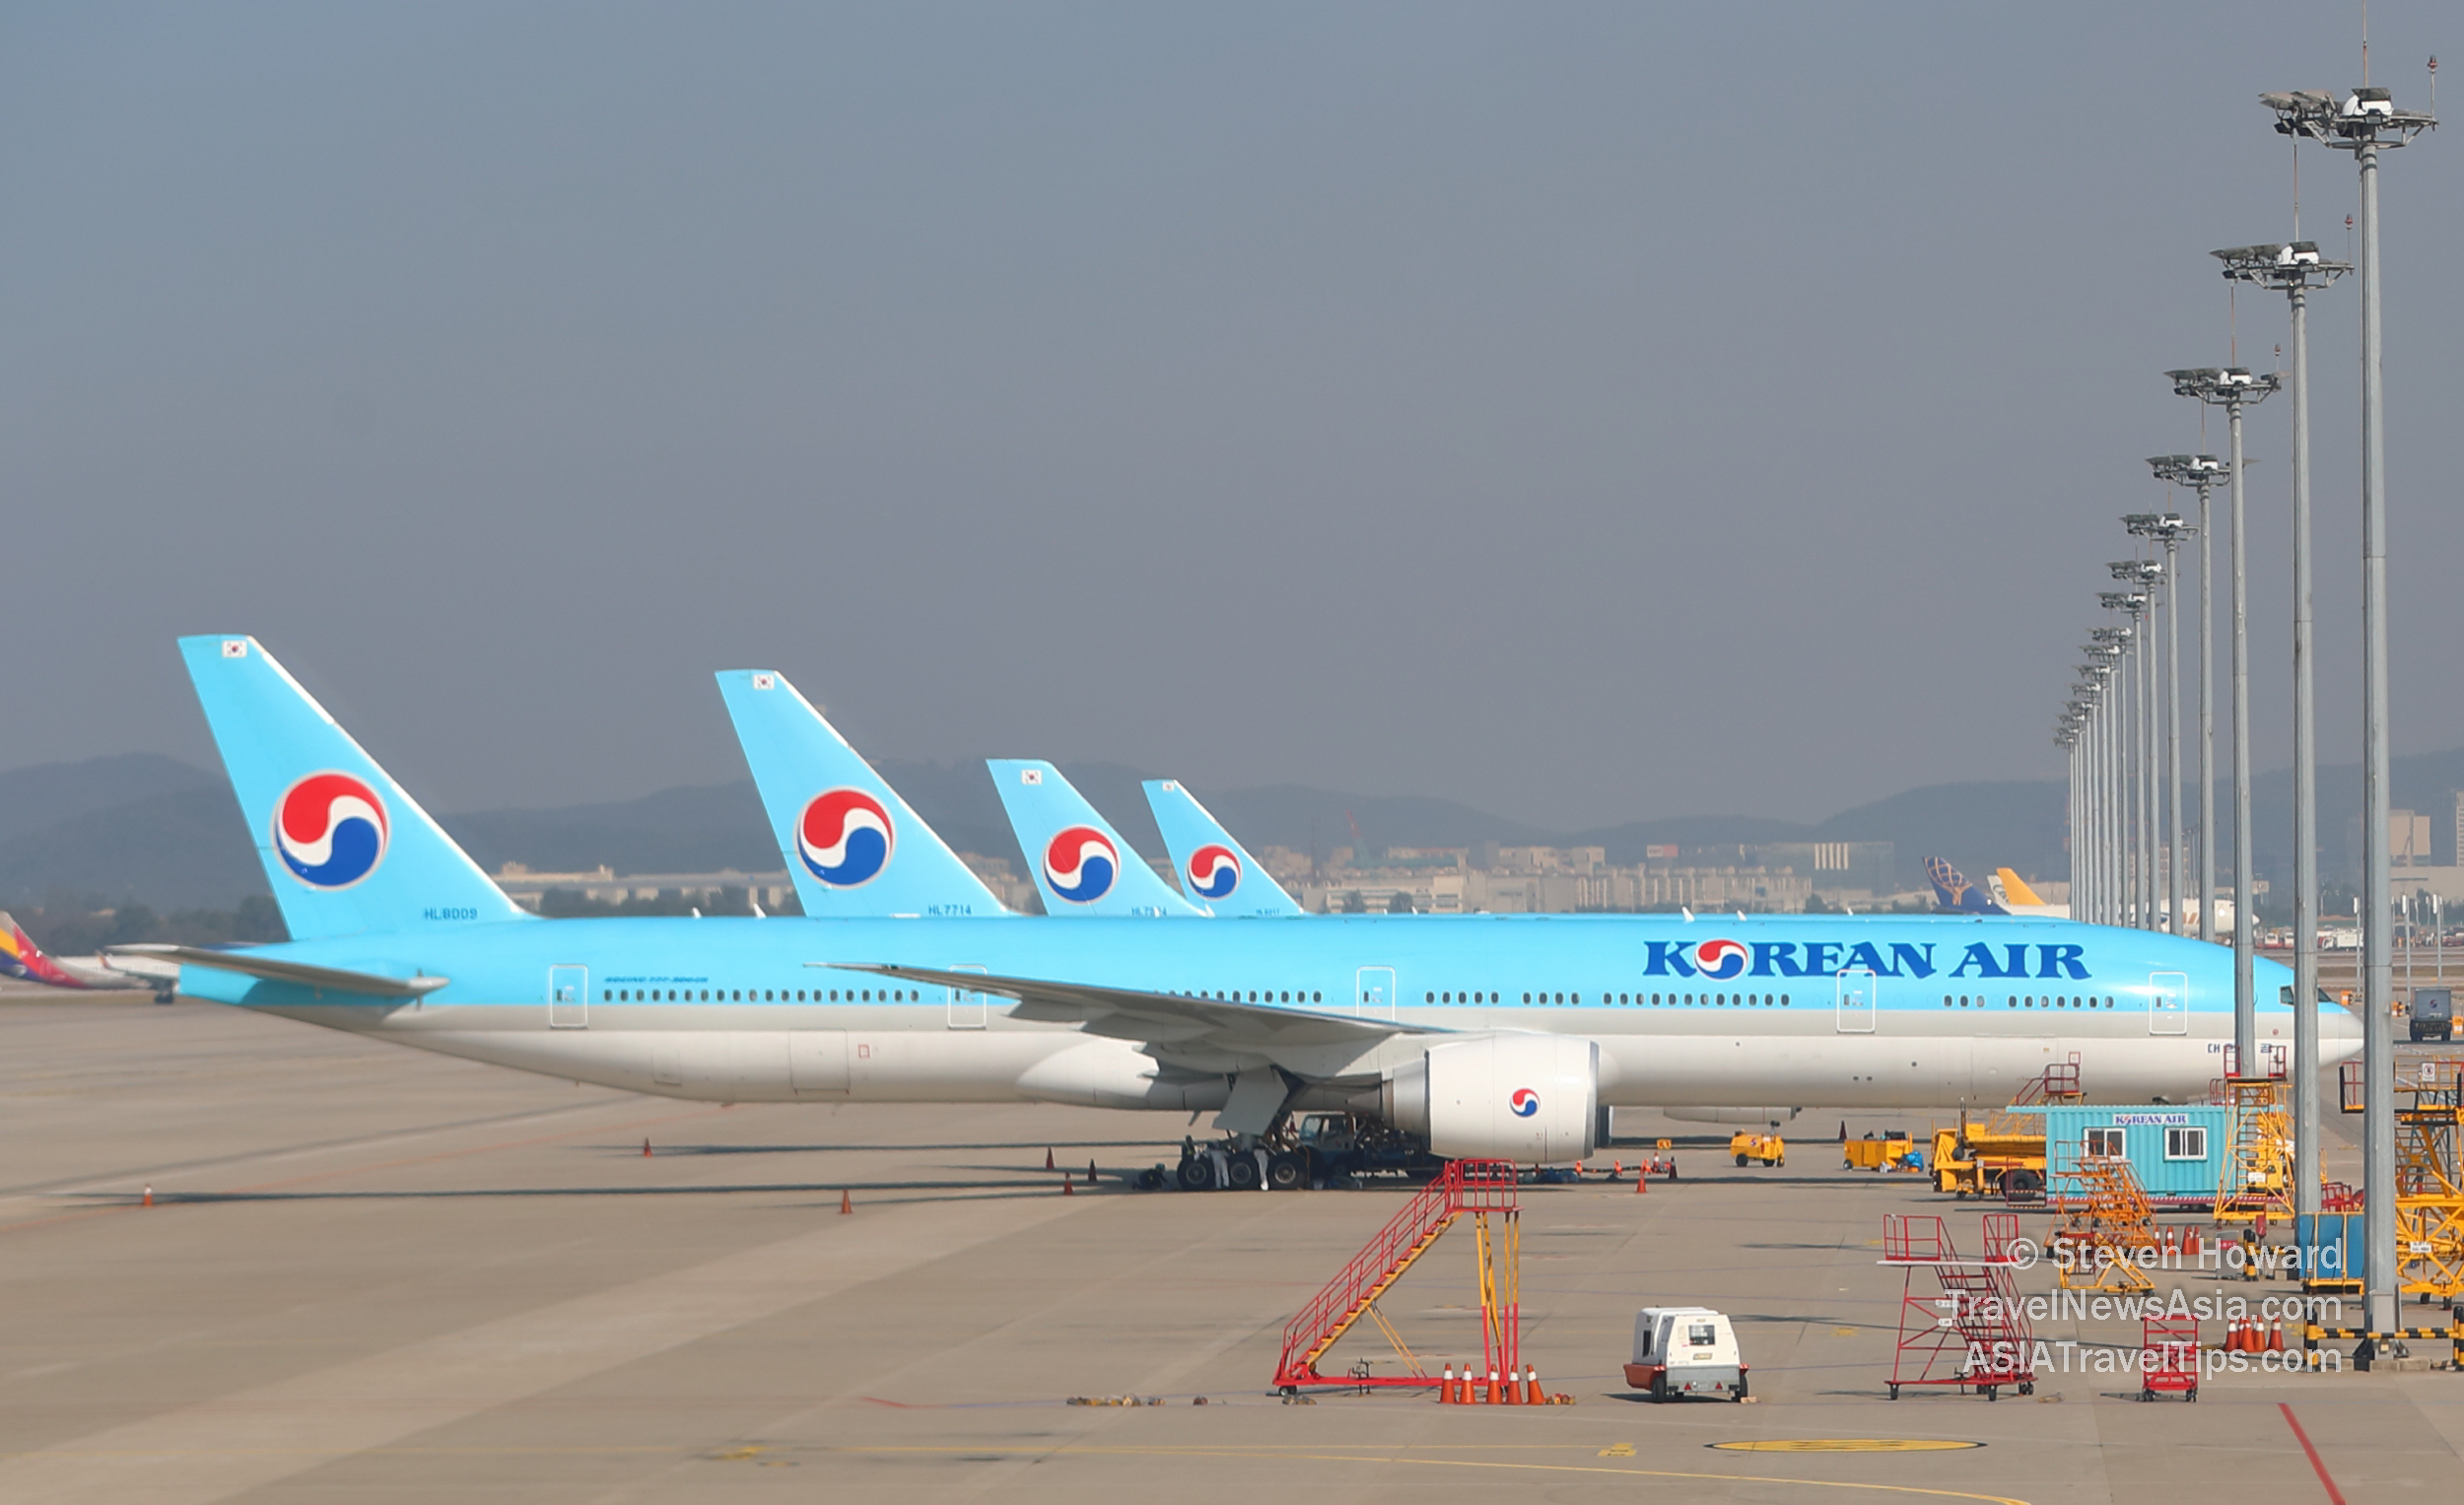 Korean Air aircraft. Picture by Steven Howard of TravelNewsAsia.com Click to enlarge.